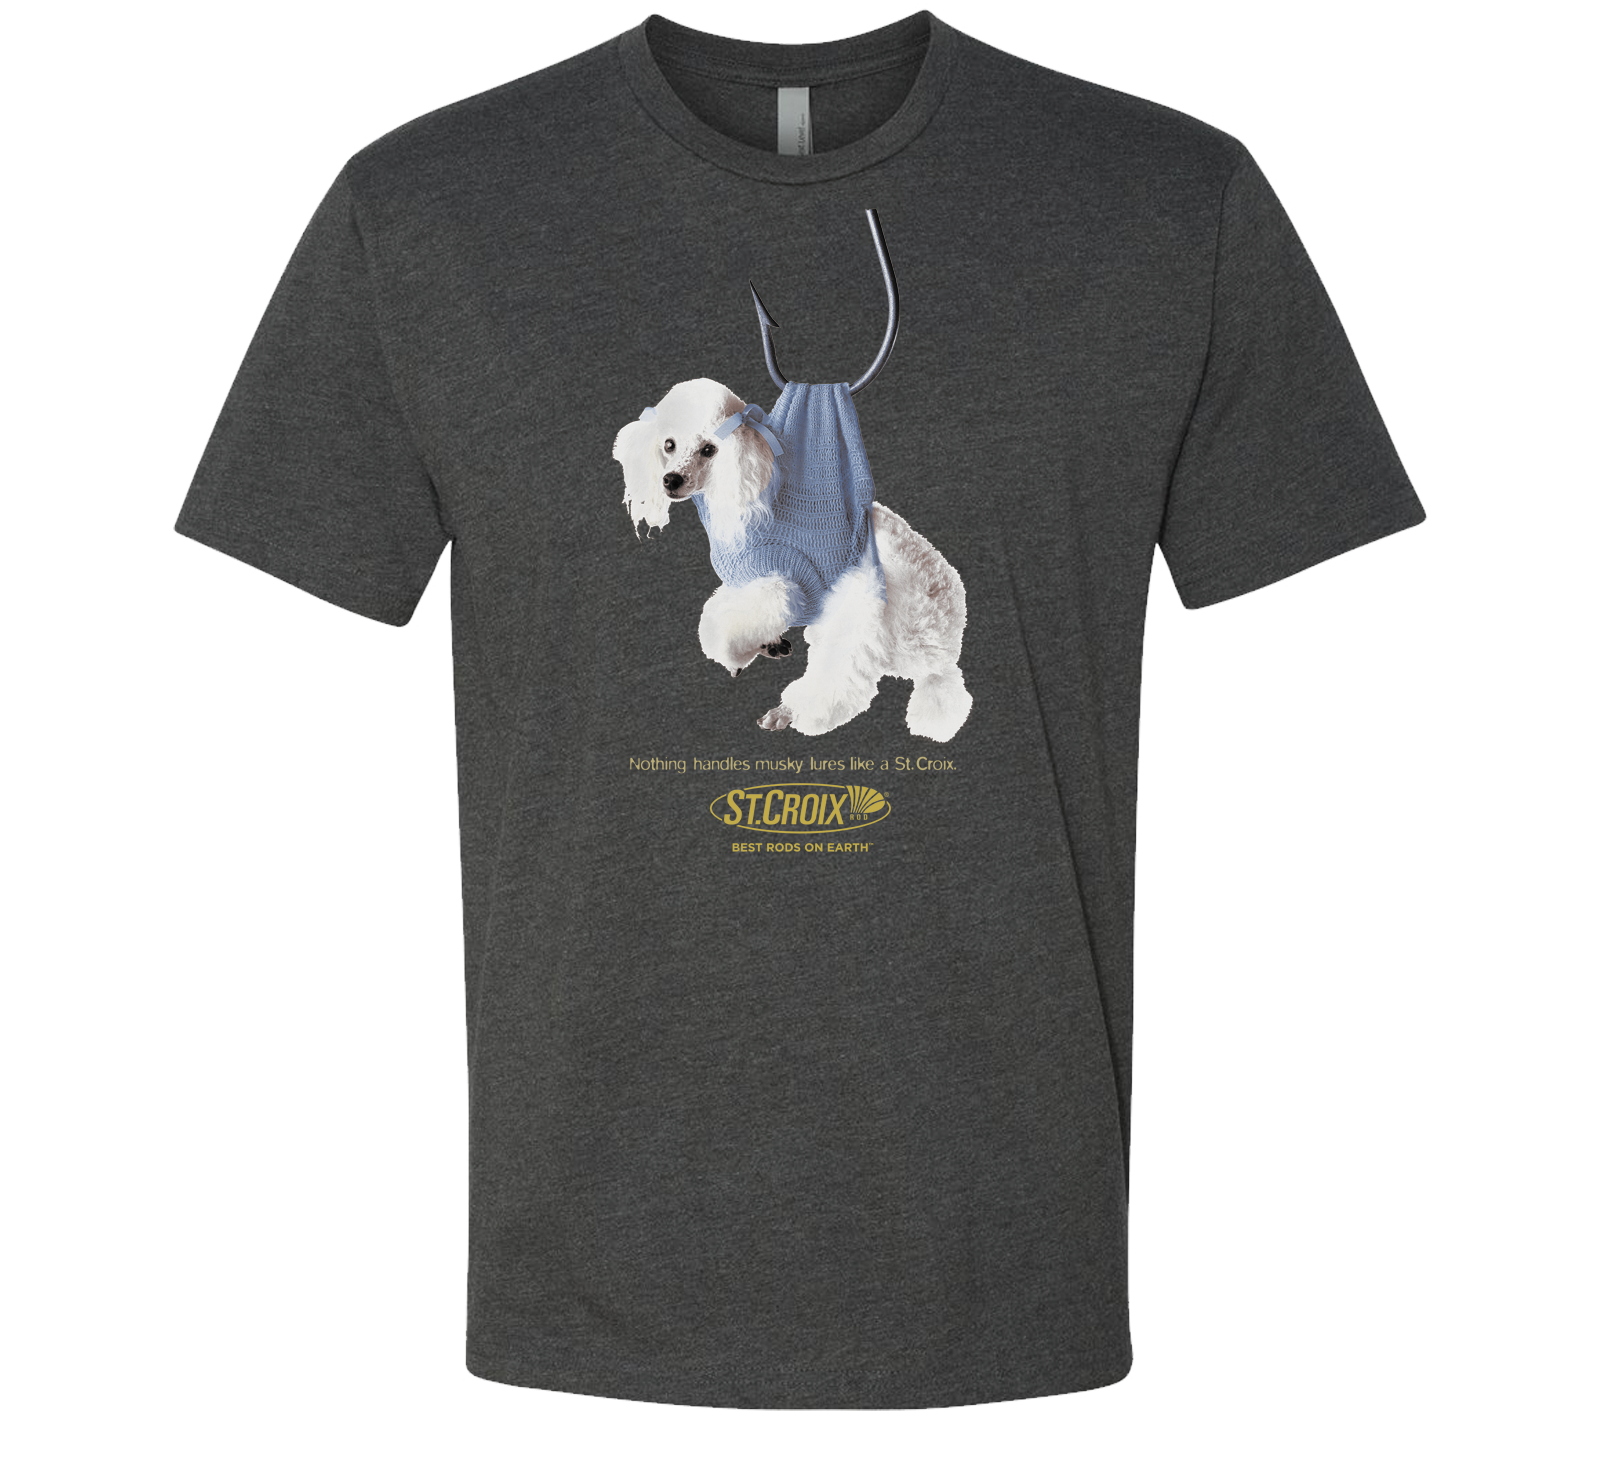 Limited Edition Poodle Tee